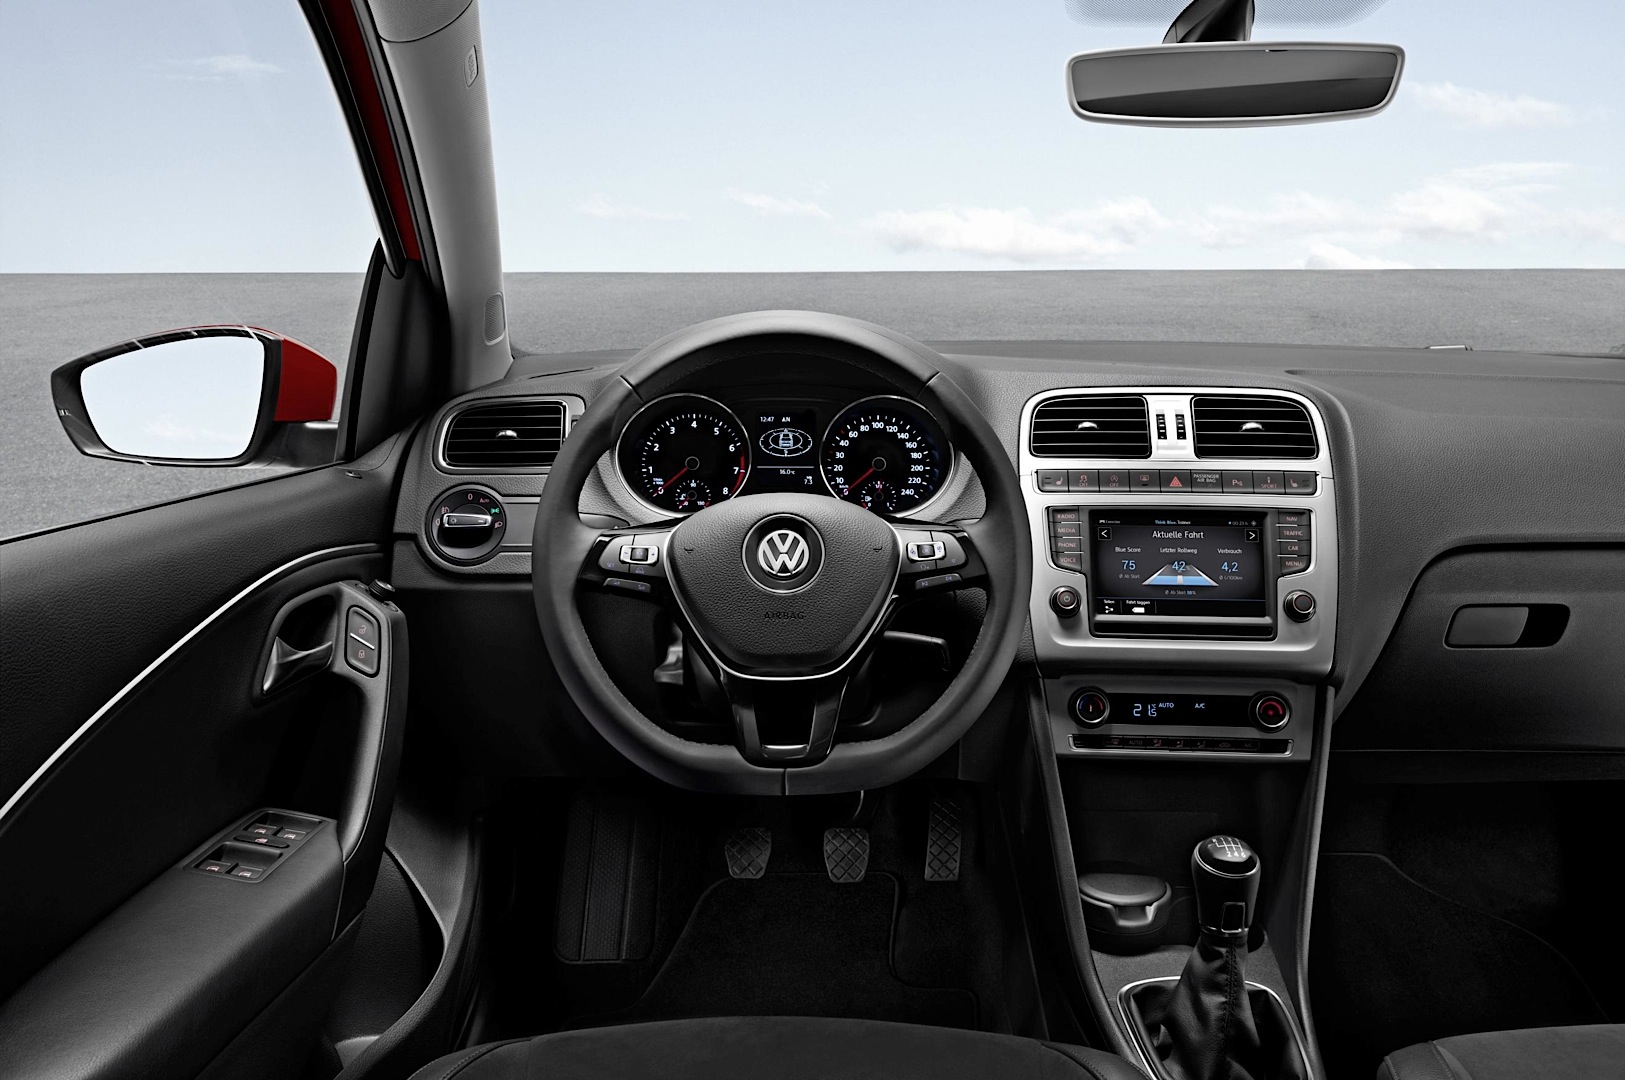 2014 volkswagen polo facelift interior and updated tech revealed_2